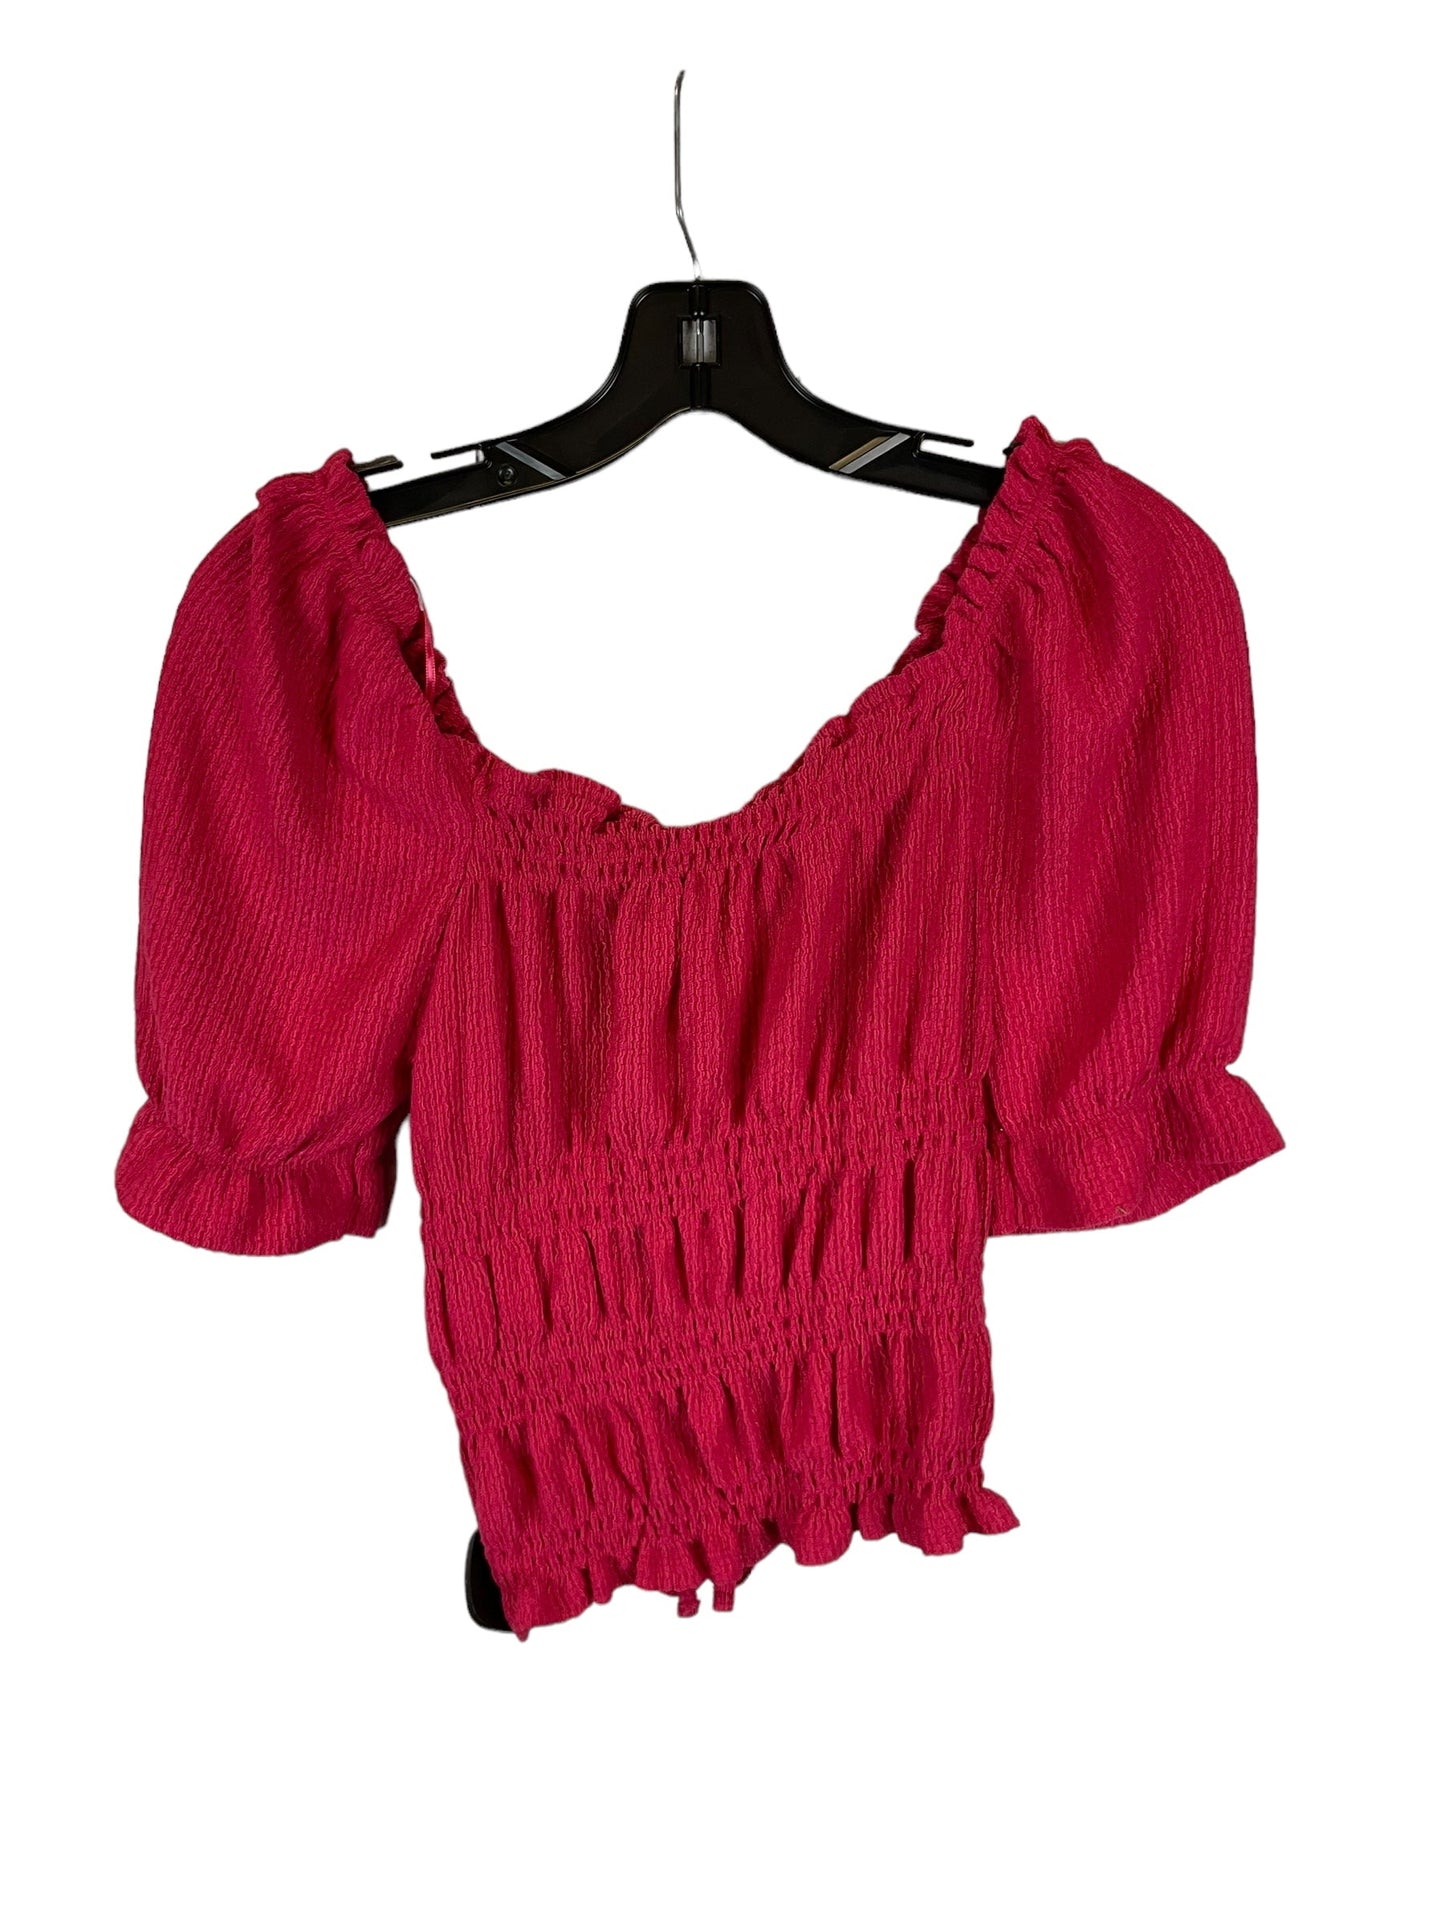 Pink Top Short Sleeve Pilcro, Size Xs